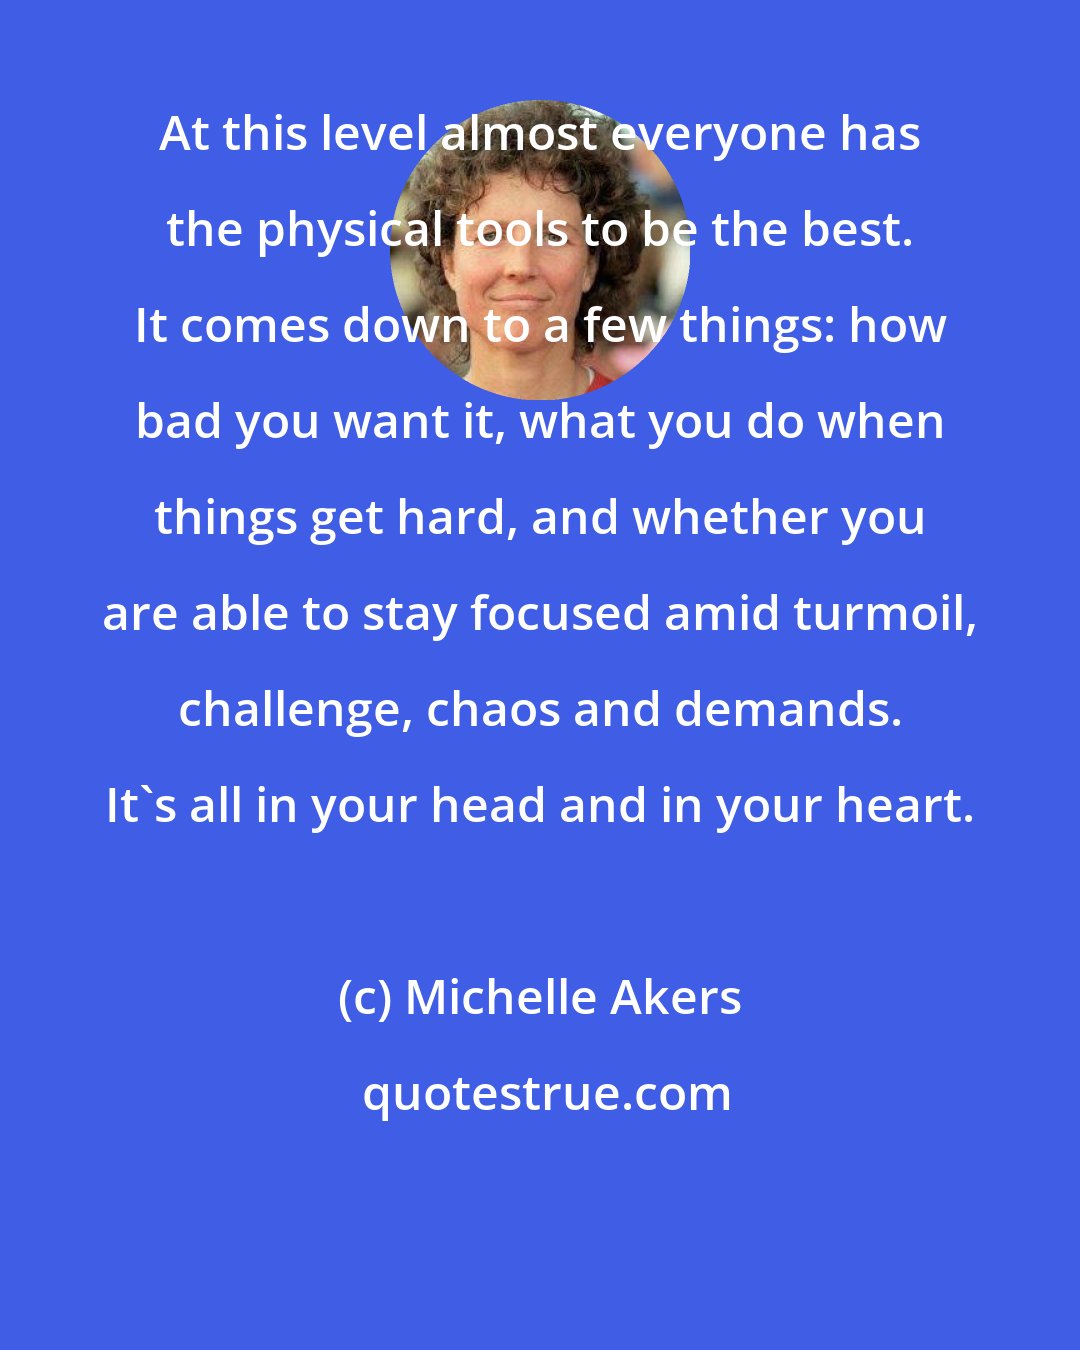 Michelle Akers: At this level almost everyone has the physical tools to be the best. It comes down to a few things: how bad you want it, what you do when things get hard, and whether you are able to stay focused amid turmoil, challenge, chaos and demands. It's all in your head and in your heart.